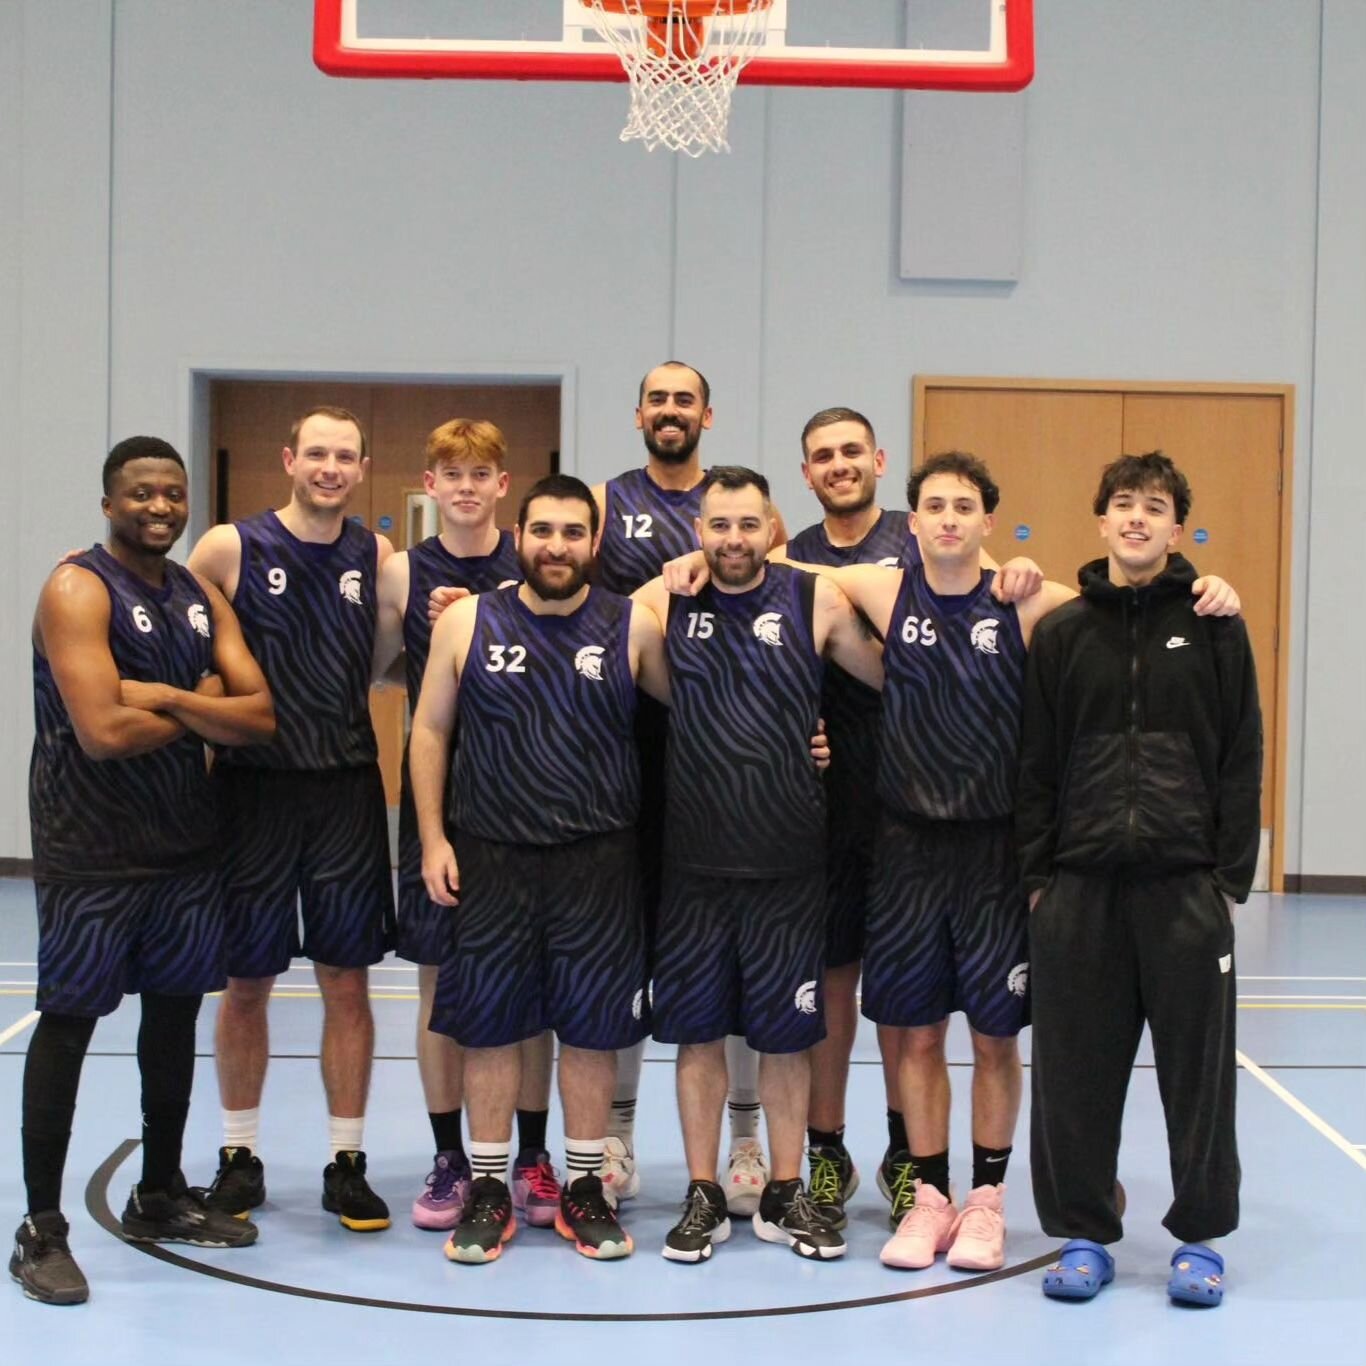 The 23/24 Winter League playoff winners!

The Titans🏆 🥇 

#basketball #jersey #channelislands #sport #playoffs #champions